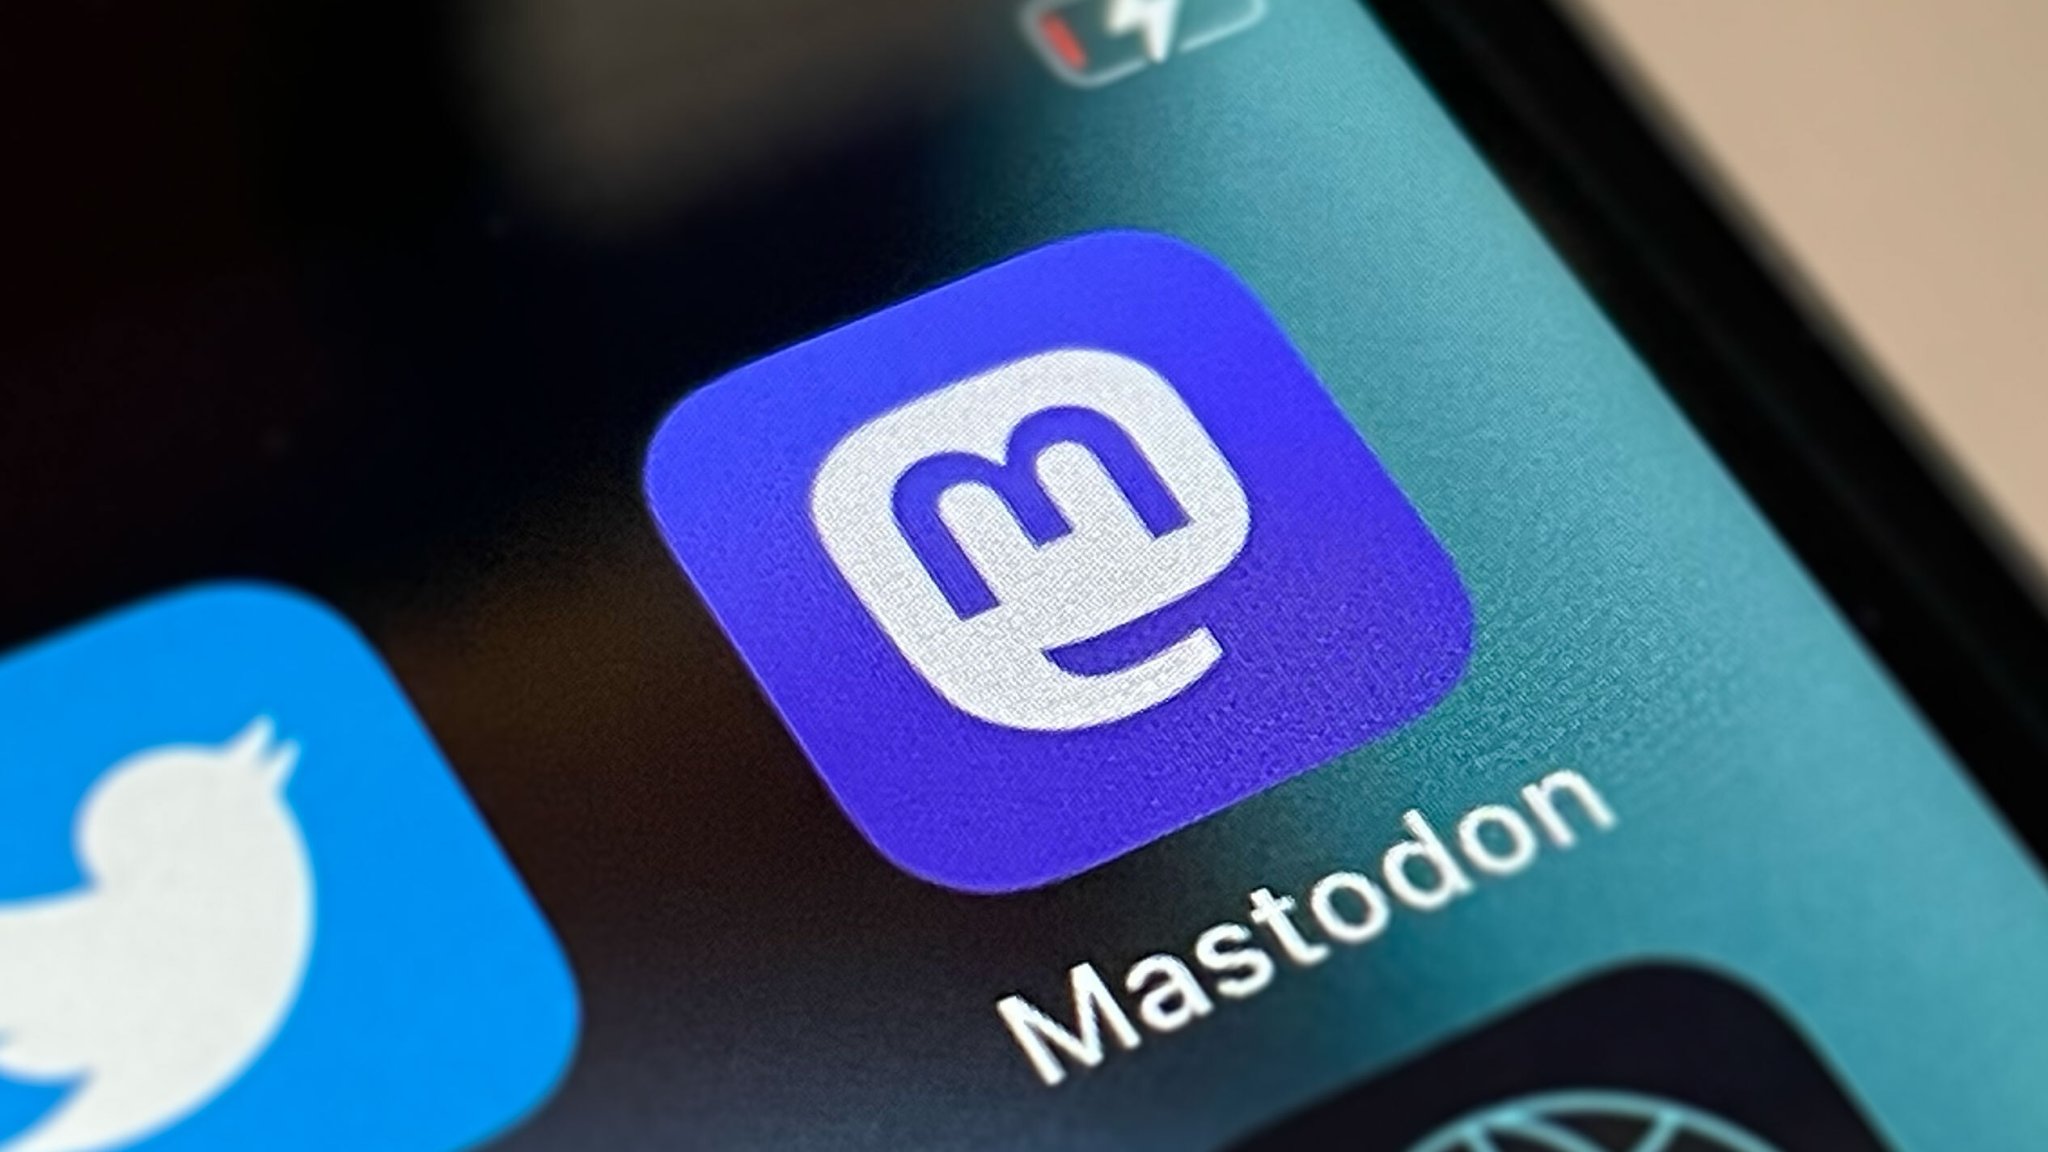 BBC is testing being on Mastodon, says fediverse better fit for public purposes than Twitter or Threads